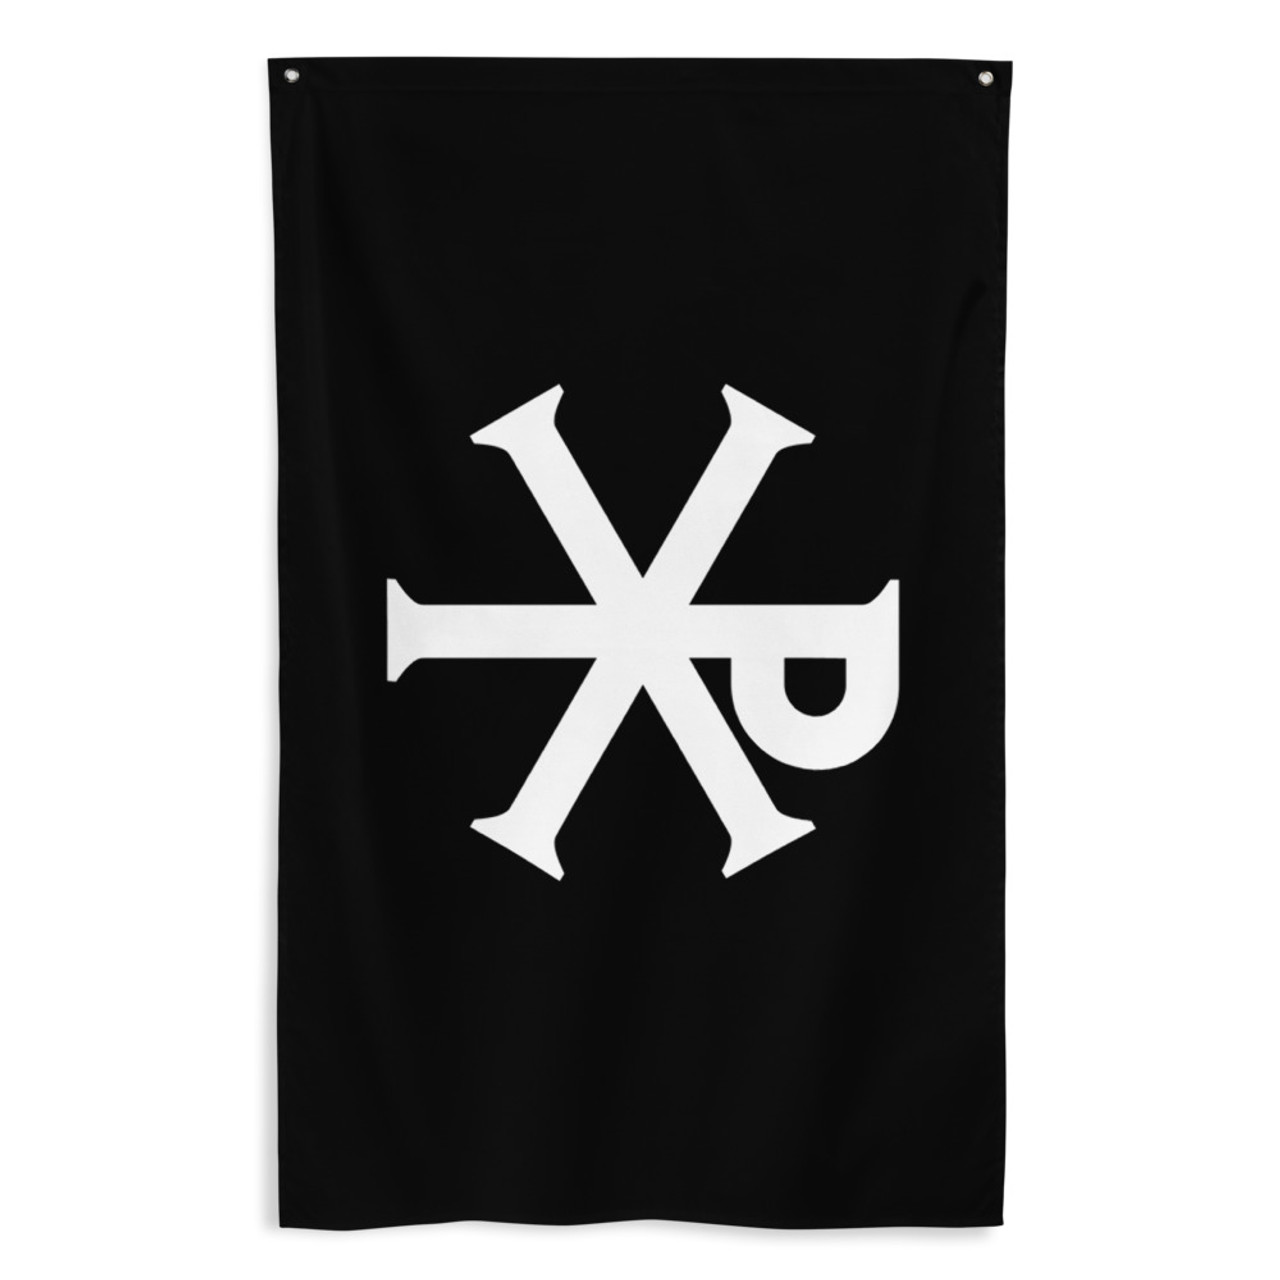 Christian Flag Black Chi Rho Antifa Sticker for Sale by thecamphillips